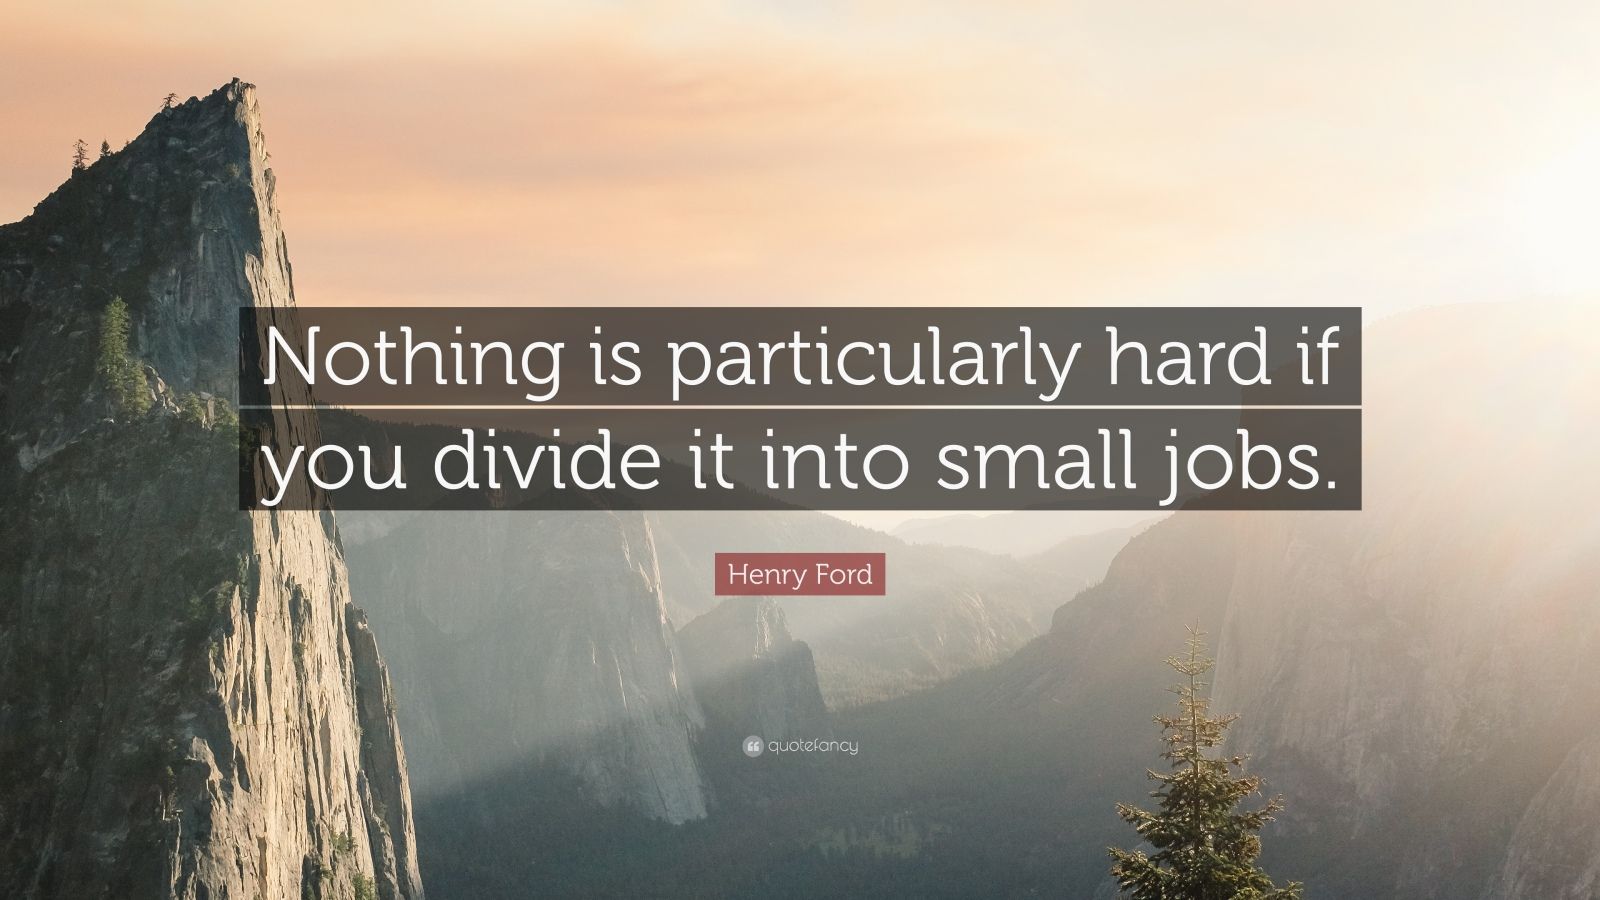 Nothing is particularly hard henry ford #9